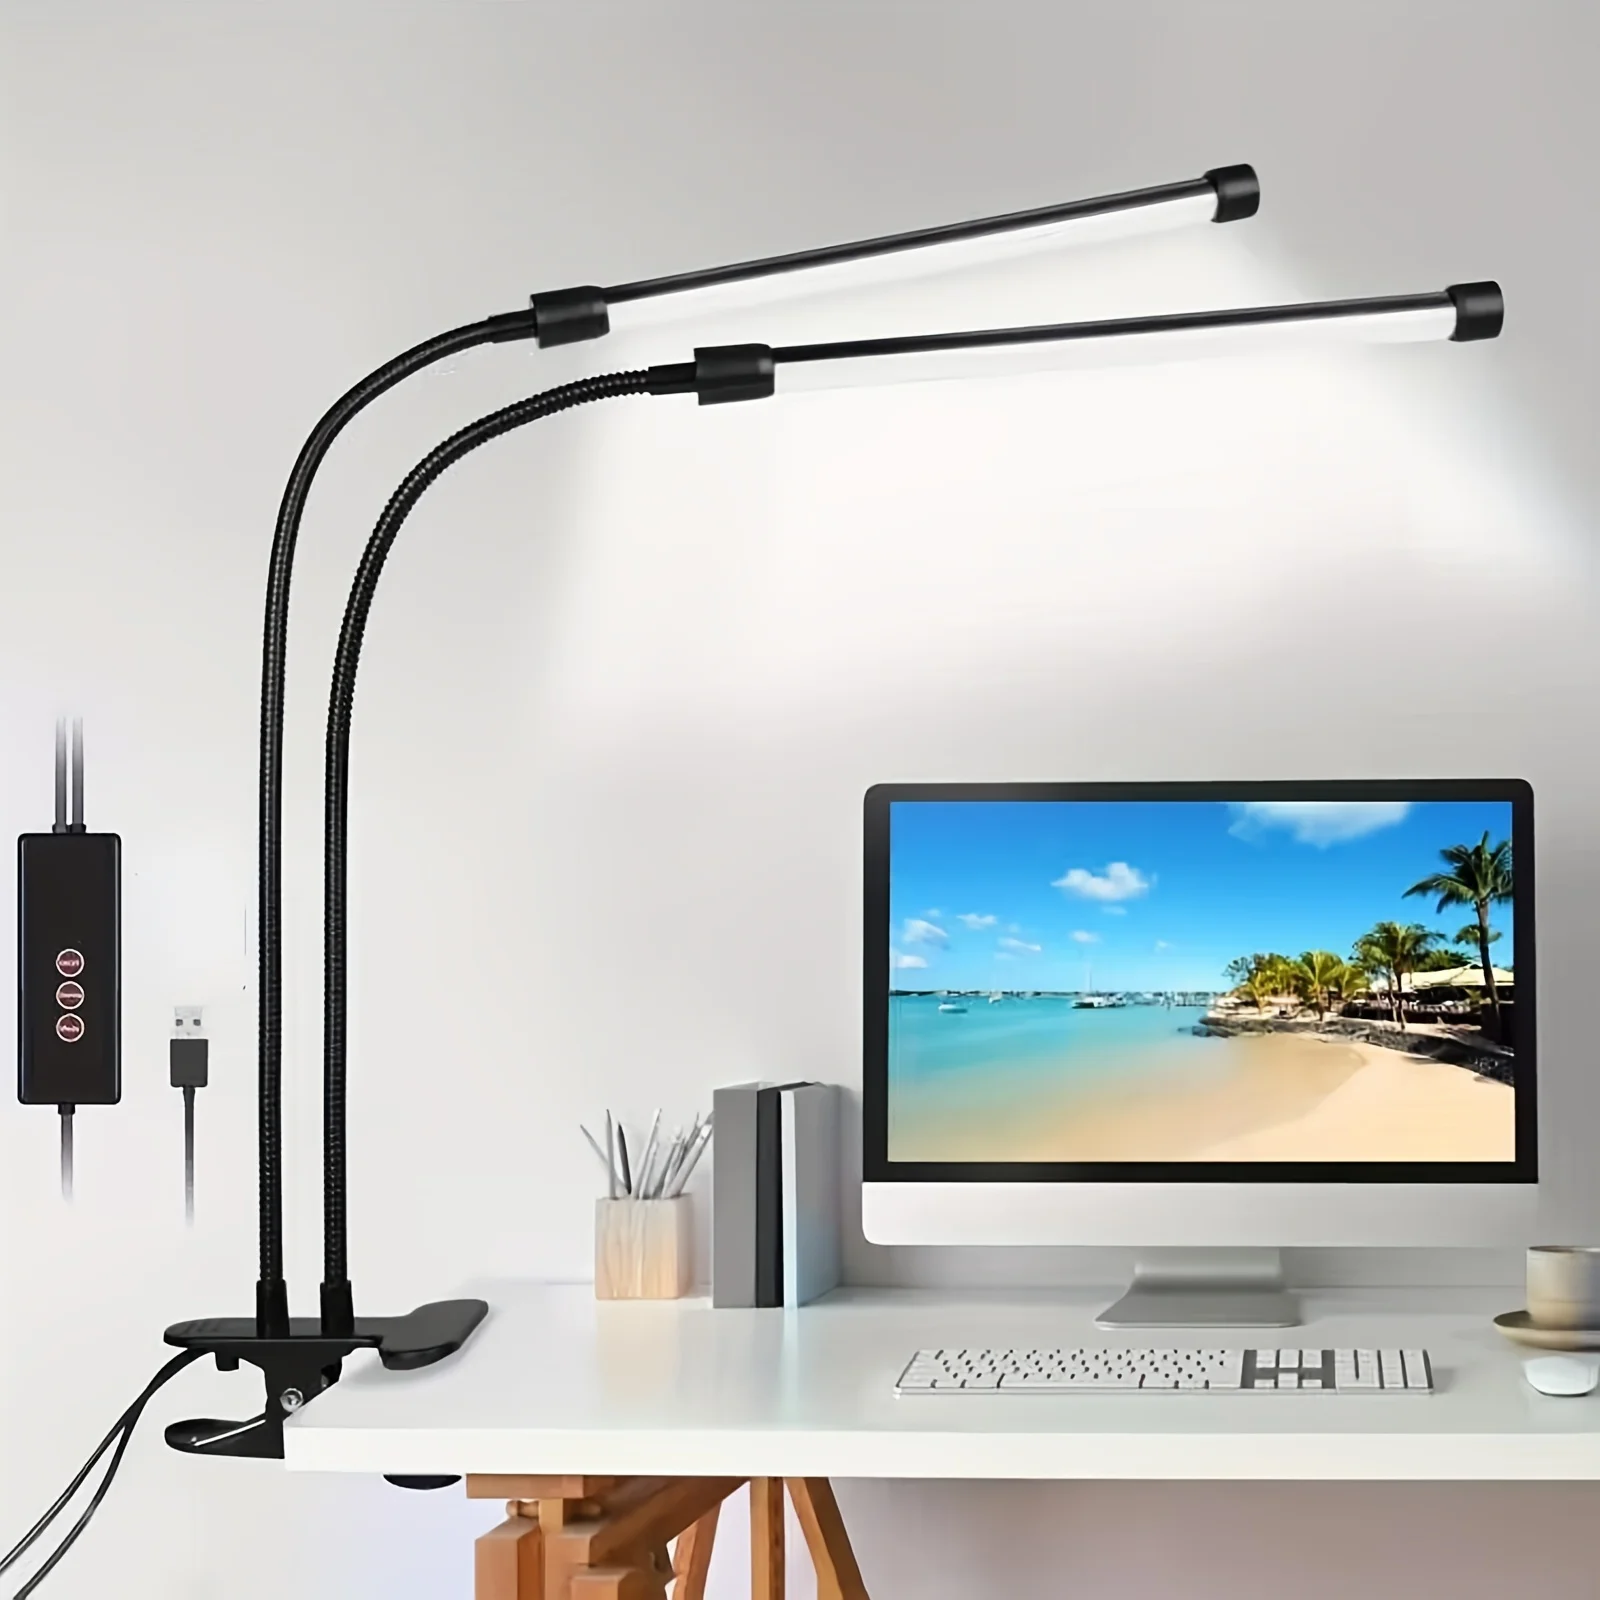 Clip-on Dual-head Study Eye-Care Desk Lamp 3-6-12 Hour Timer Function Re... - $18.46